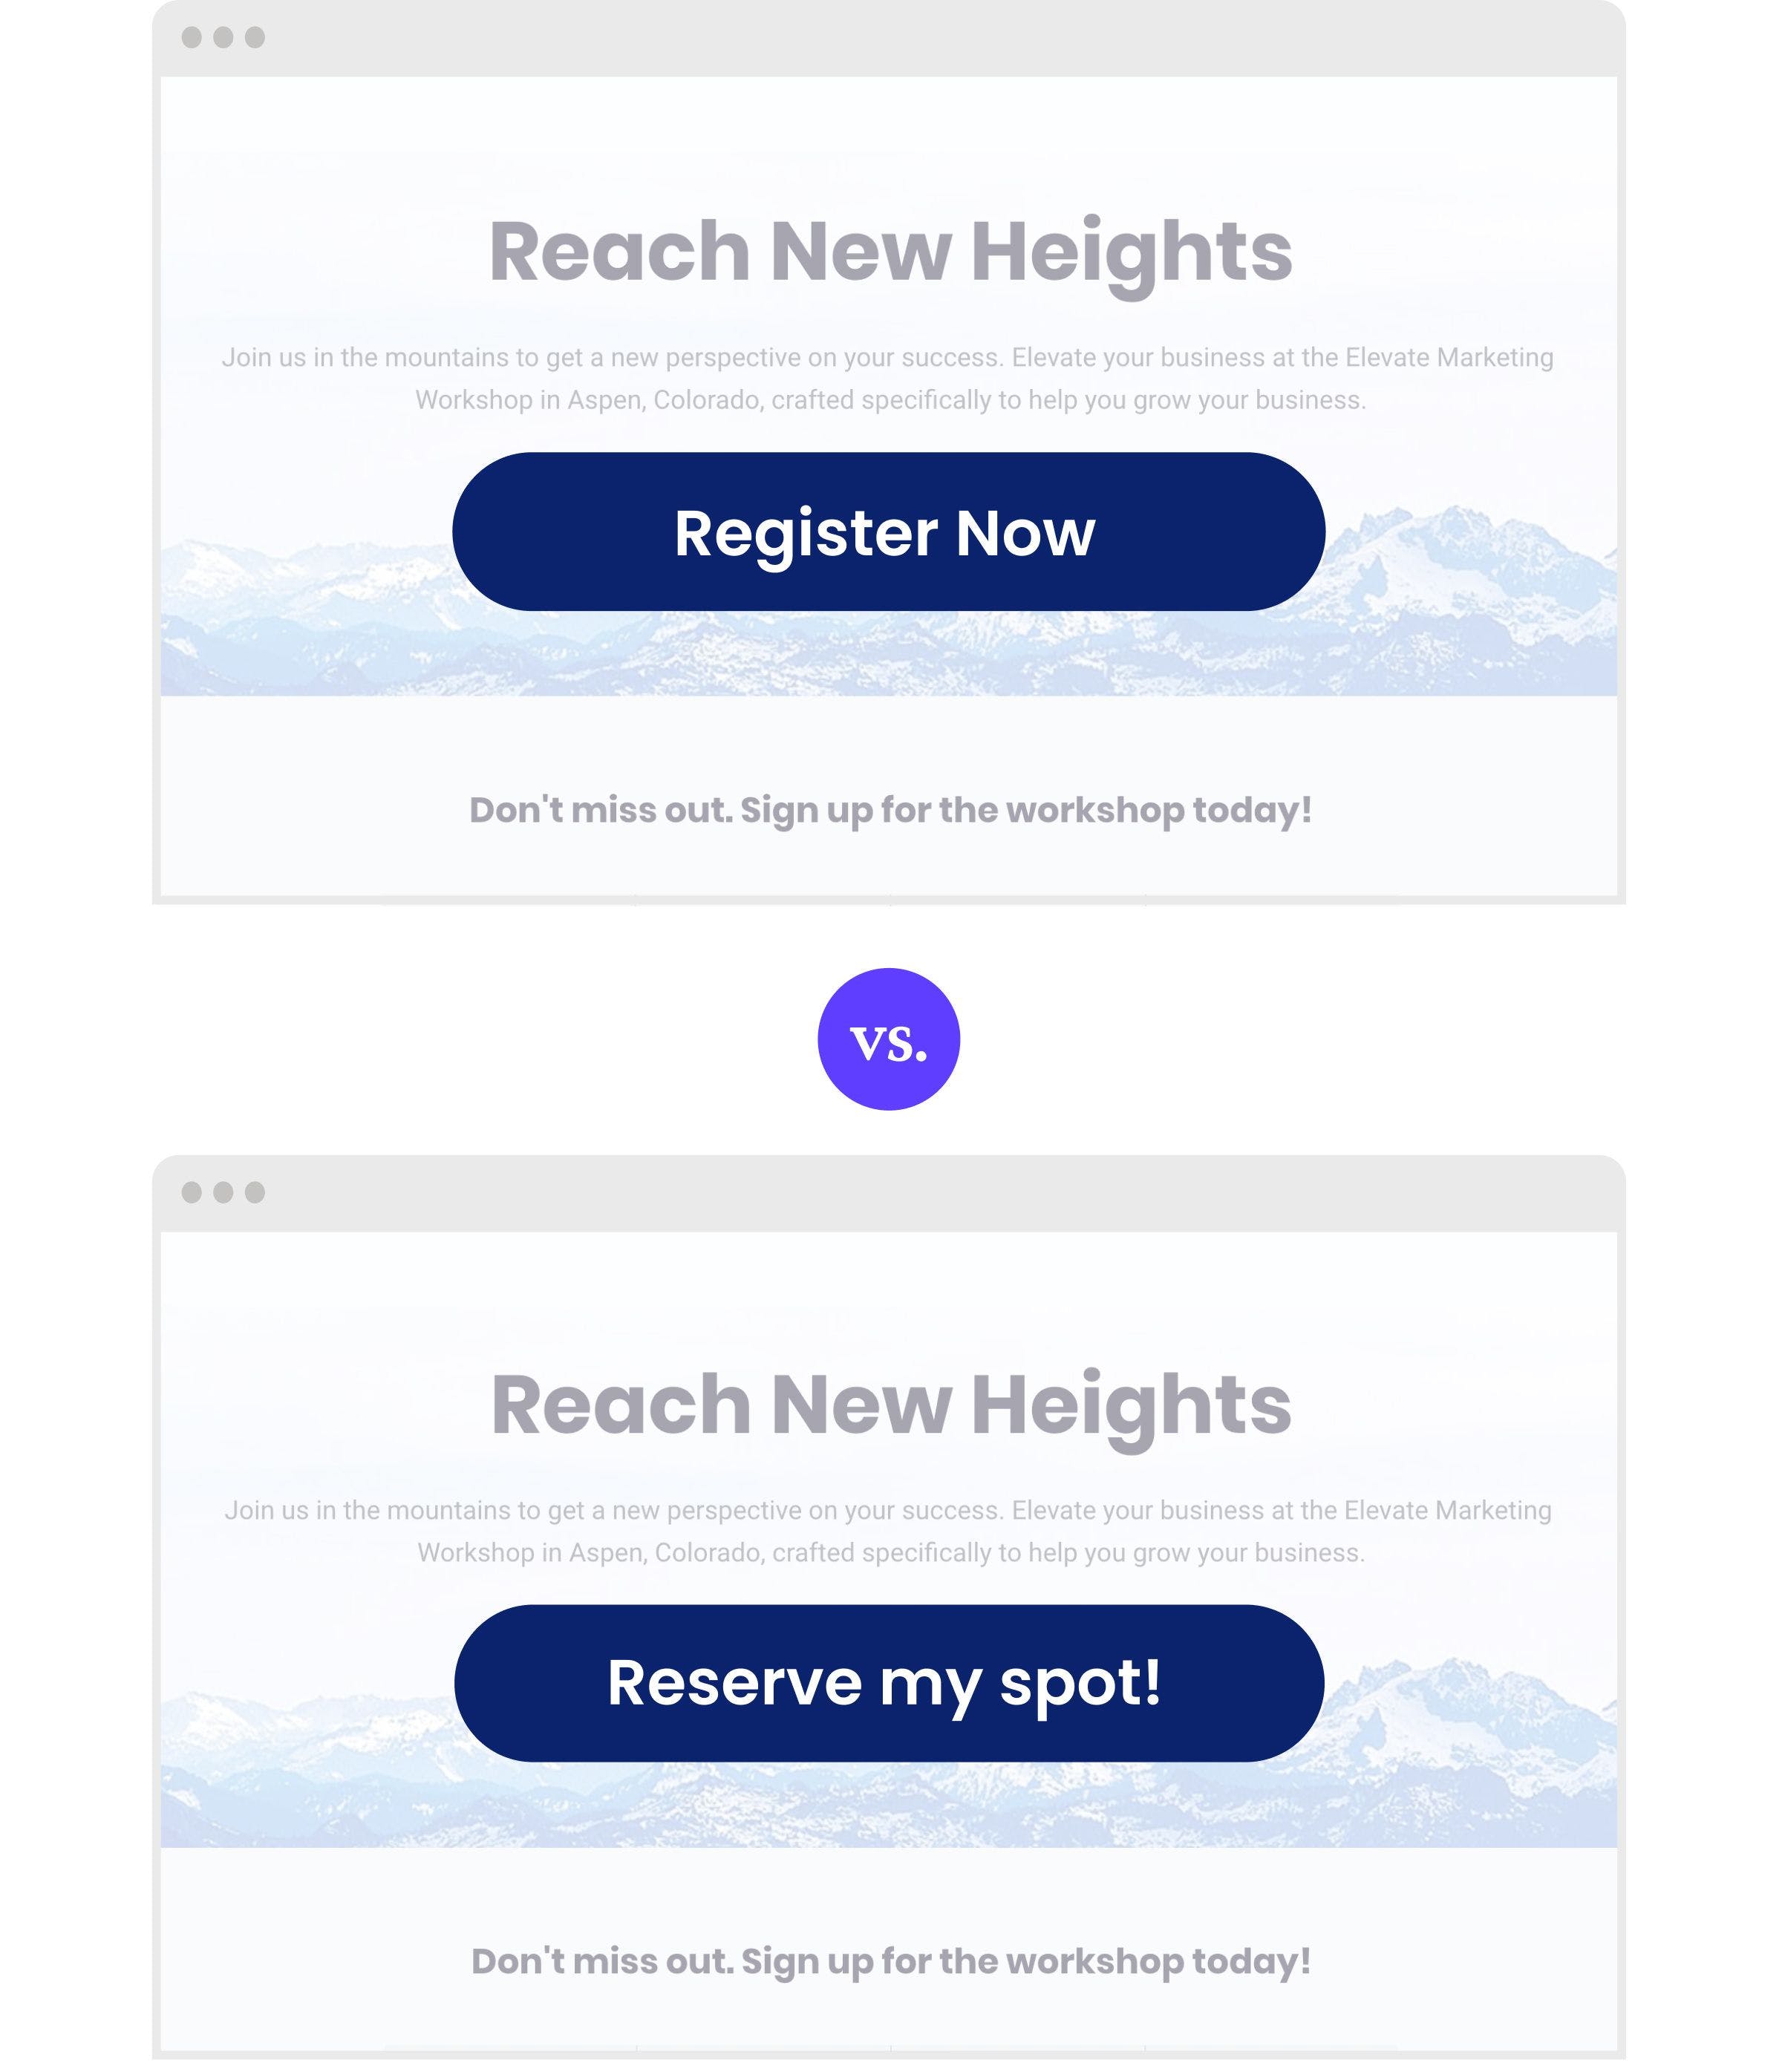 A/B testing landing page call-to-action